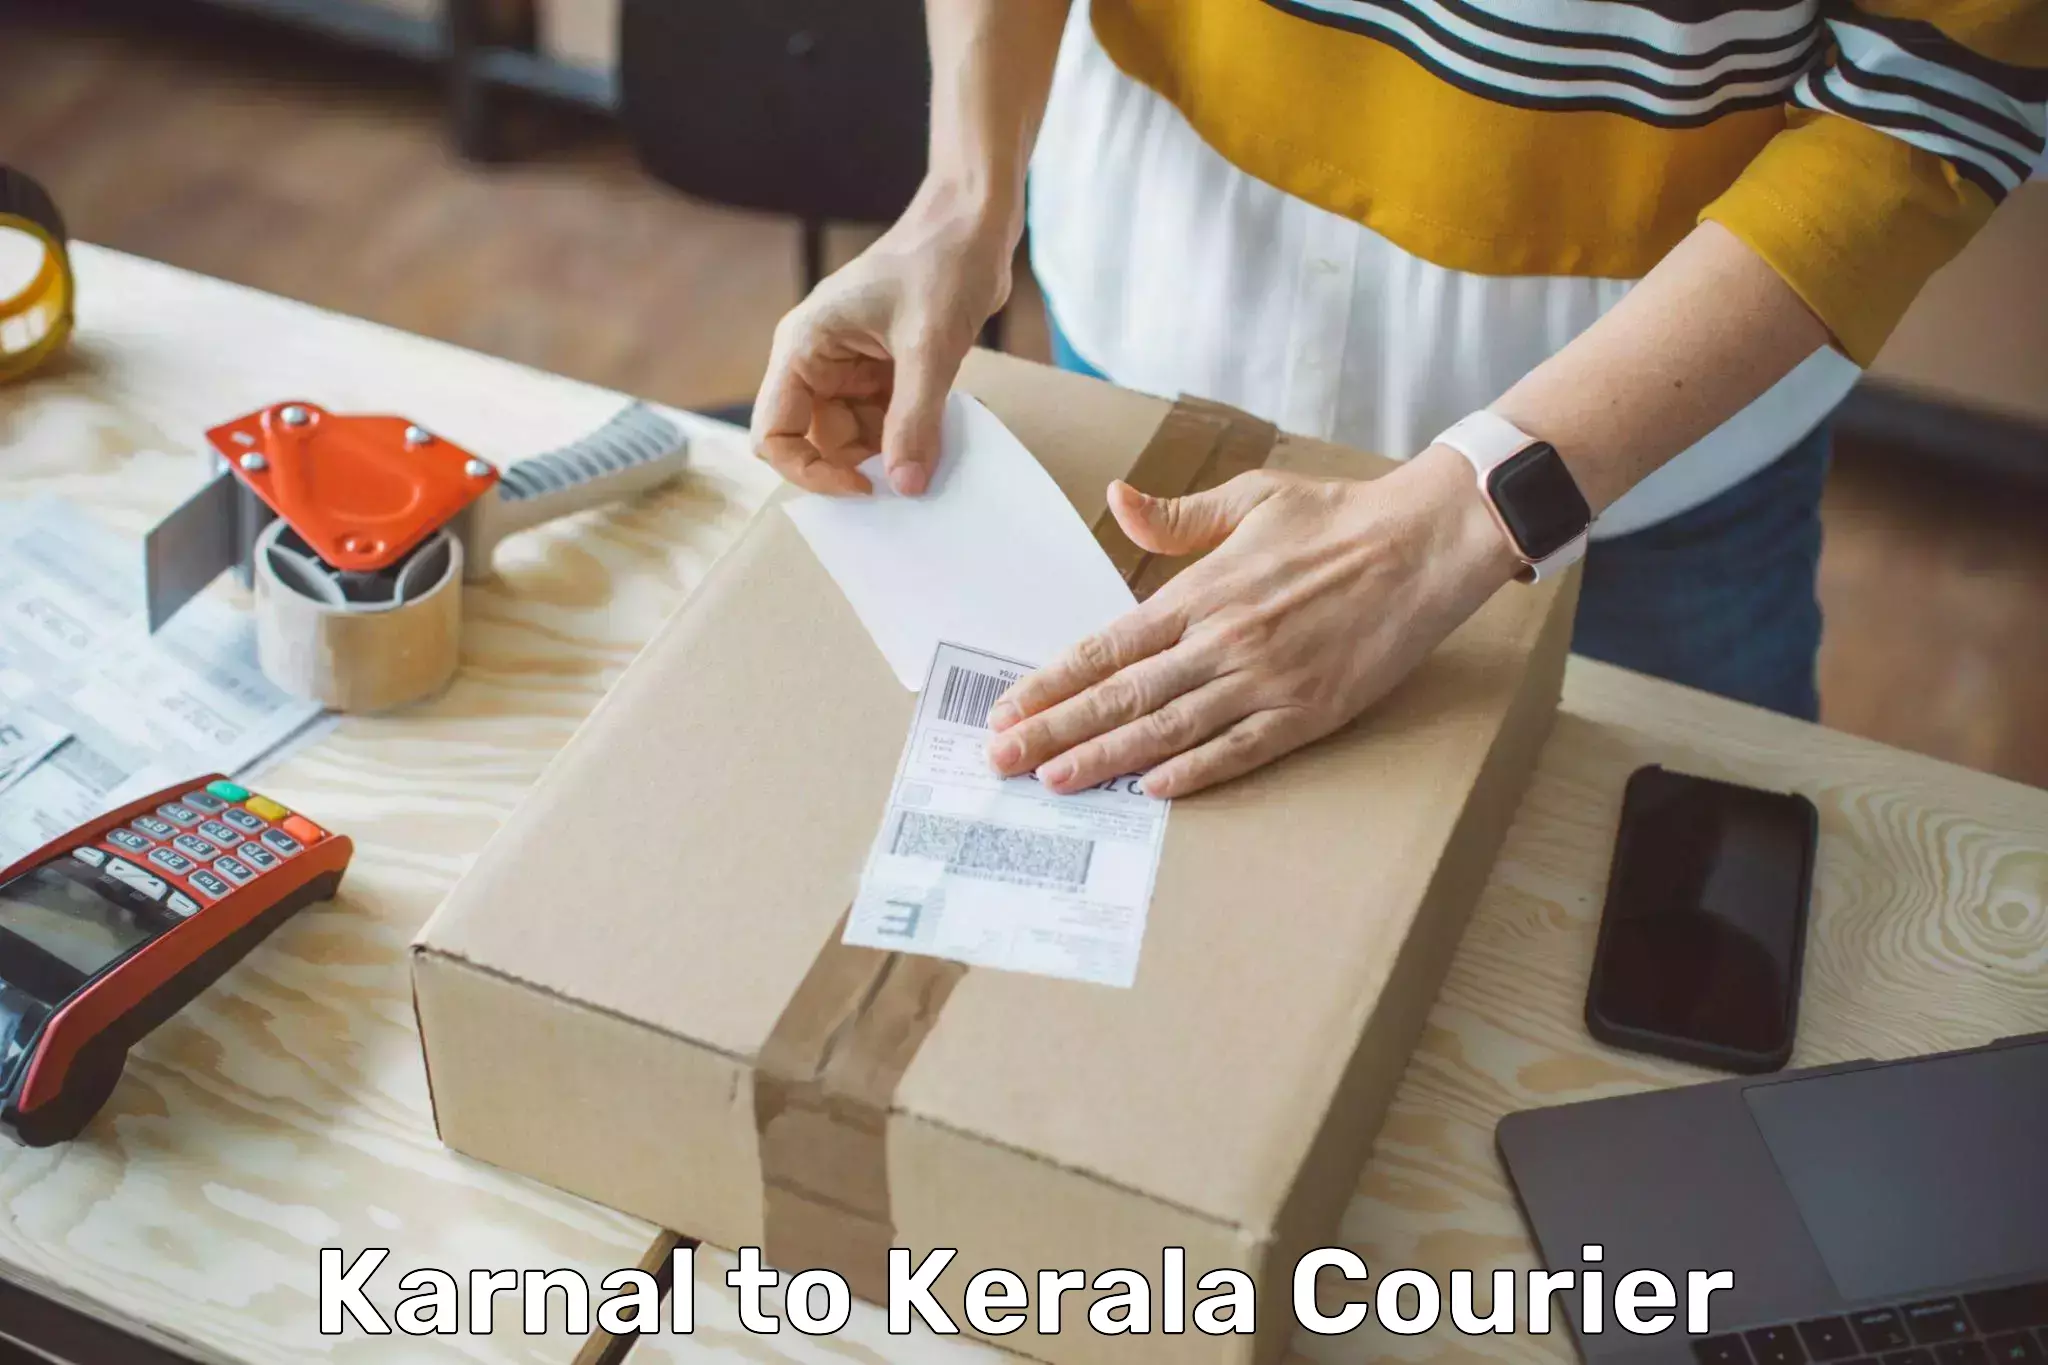 Advanced delivery network Karnal to Kerala